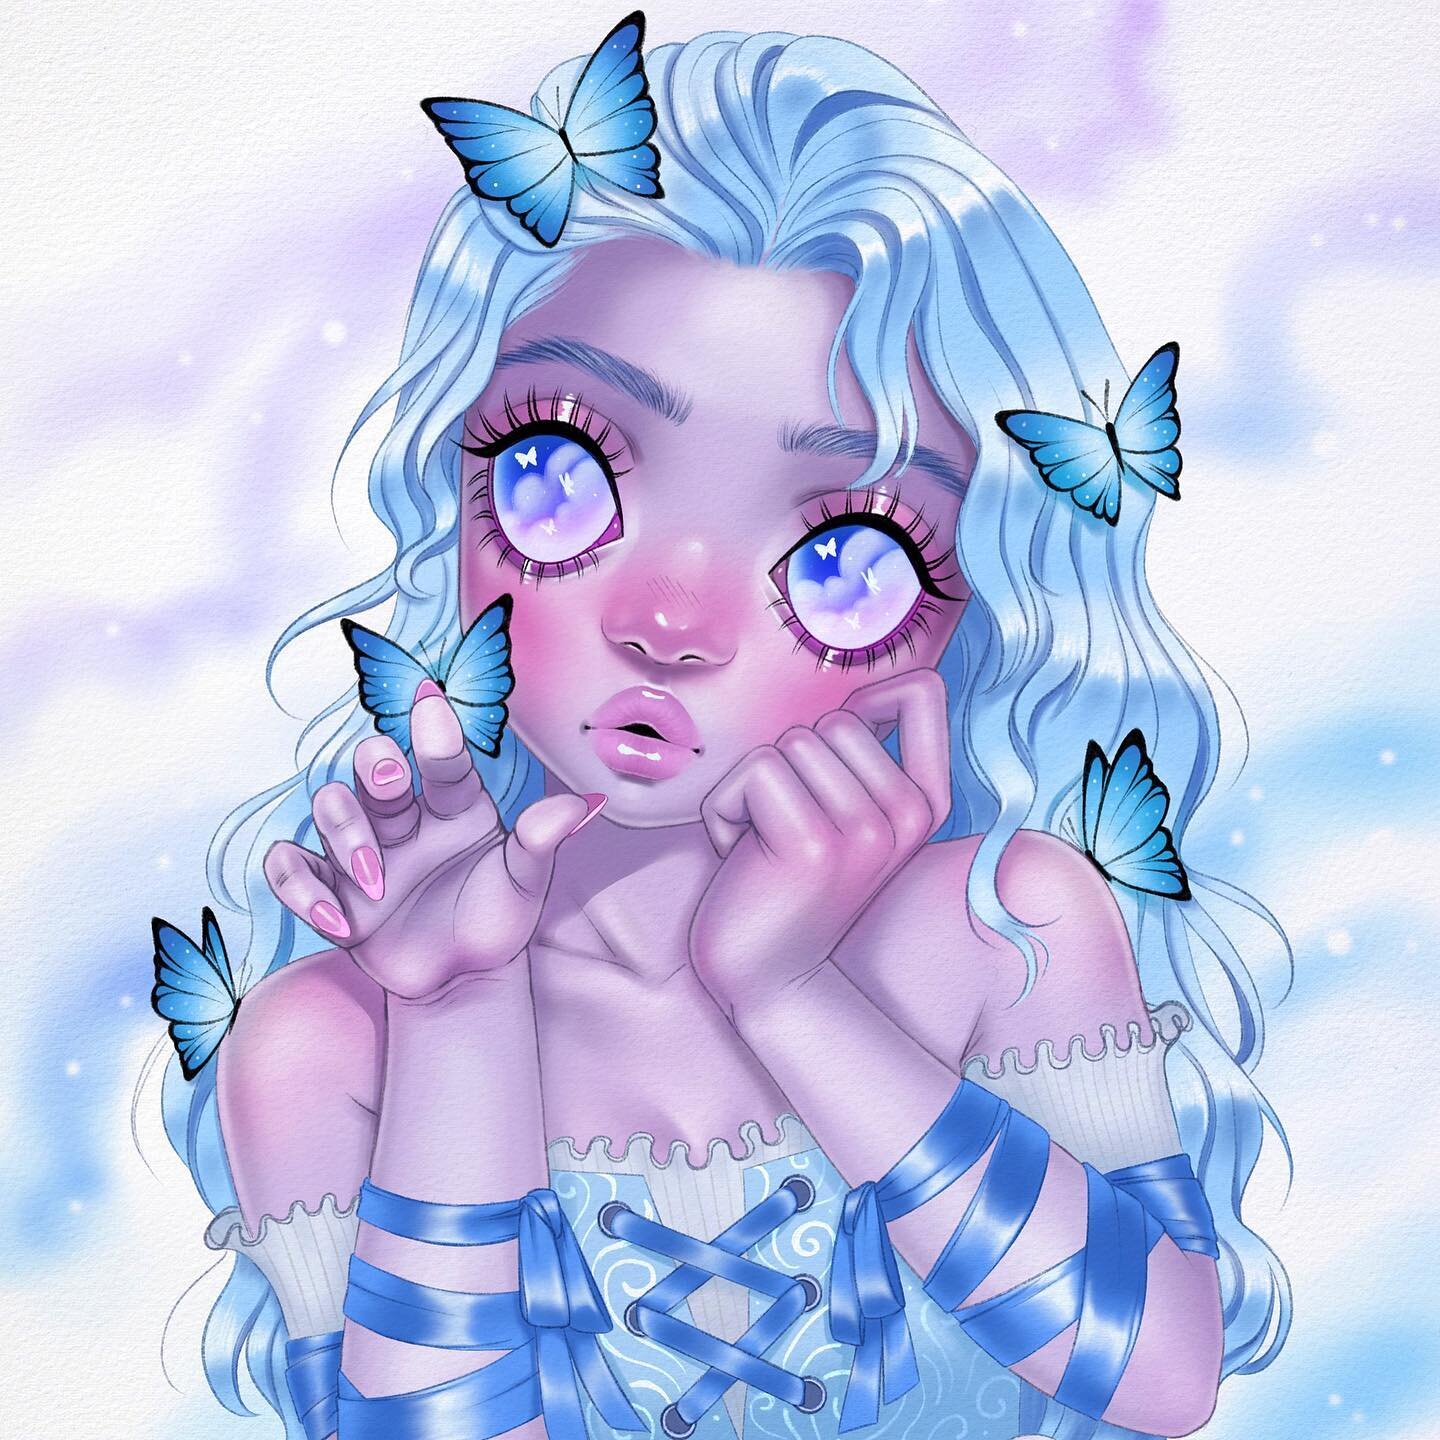 Here is my finished blue butterfly girl artwork 🦋 Swipe to see the progress pics, it&rsquo;s super satisfying! Also prints &amp; stickers of her are available all during April on my Patreon! Just visit Patreon.com/serendipitytheartist/ or click the 